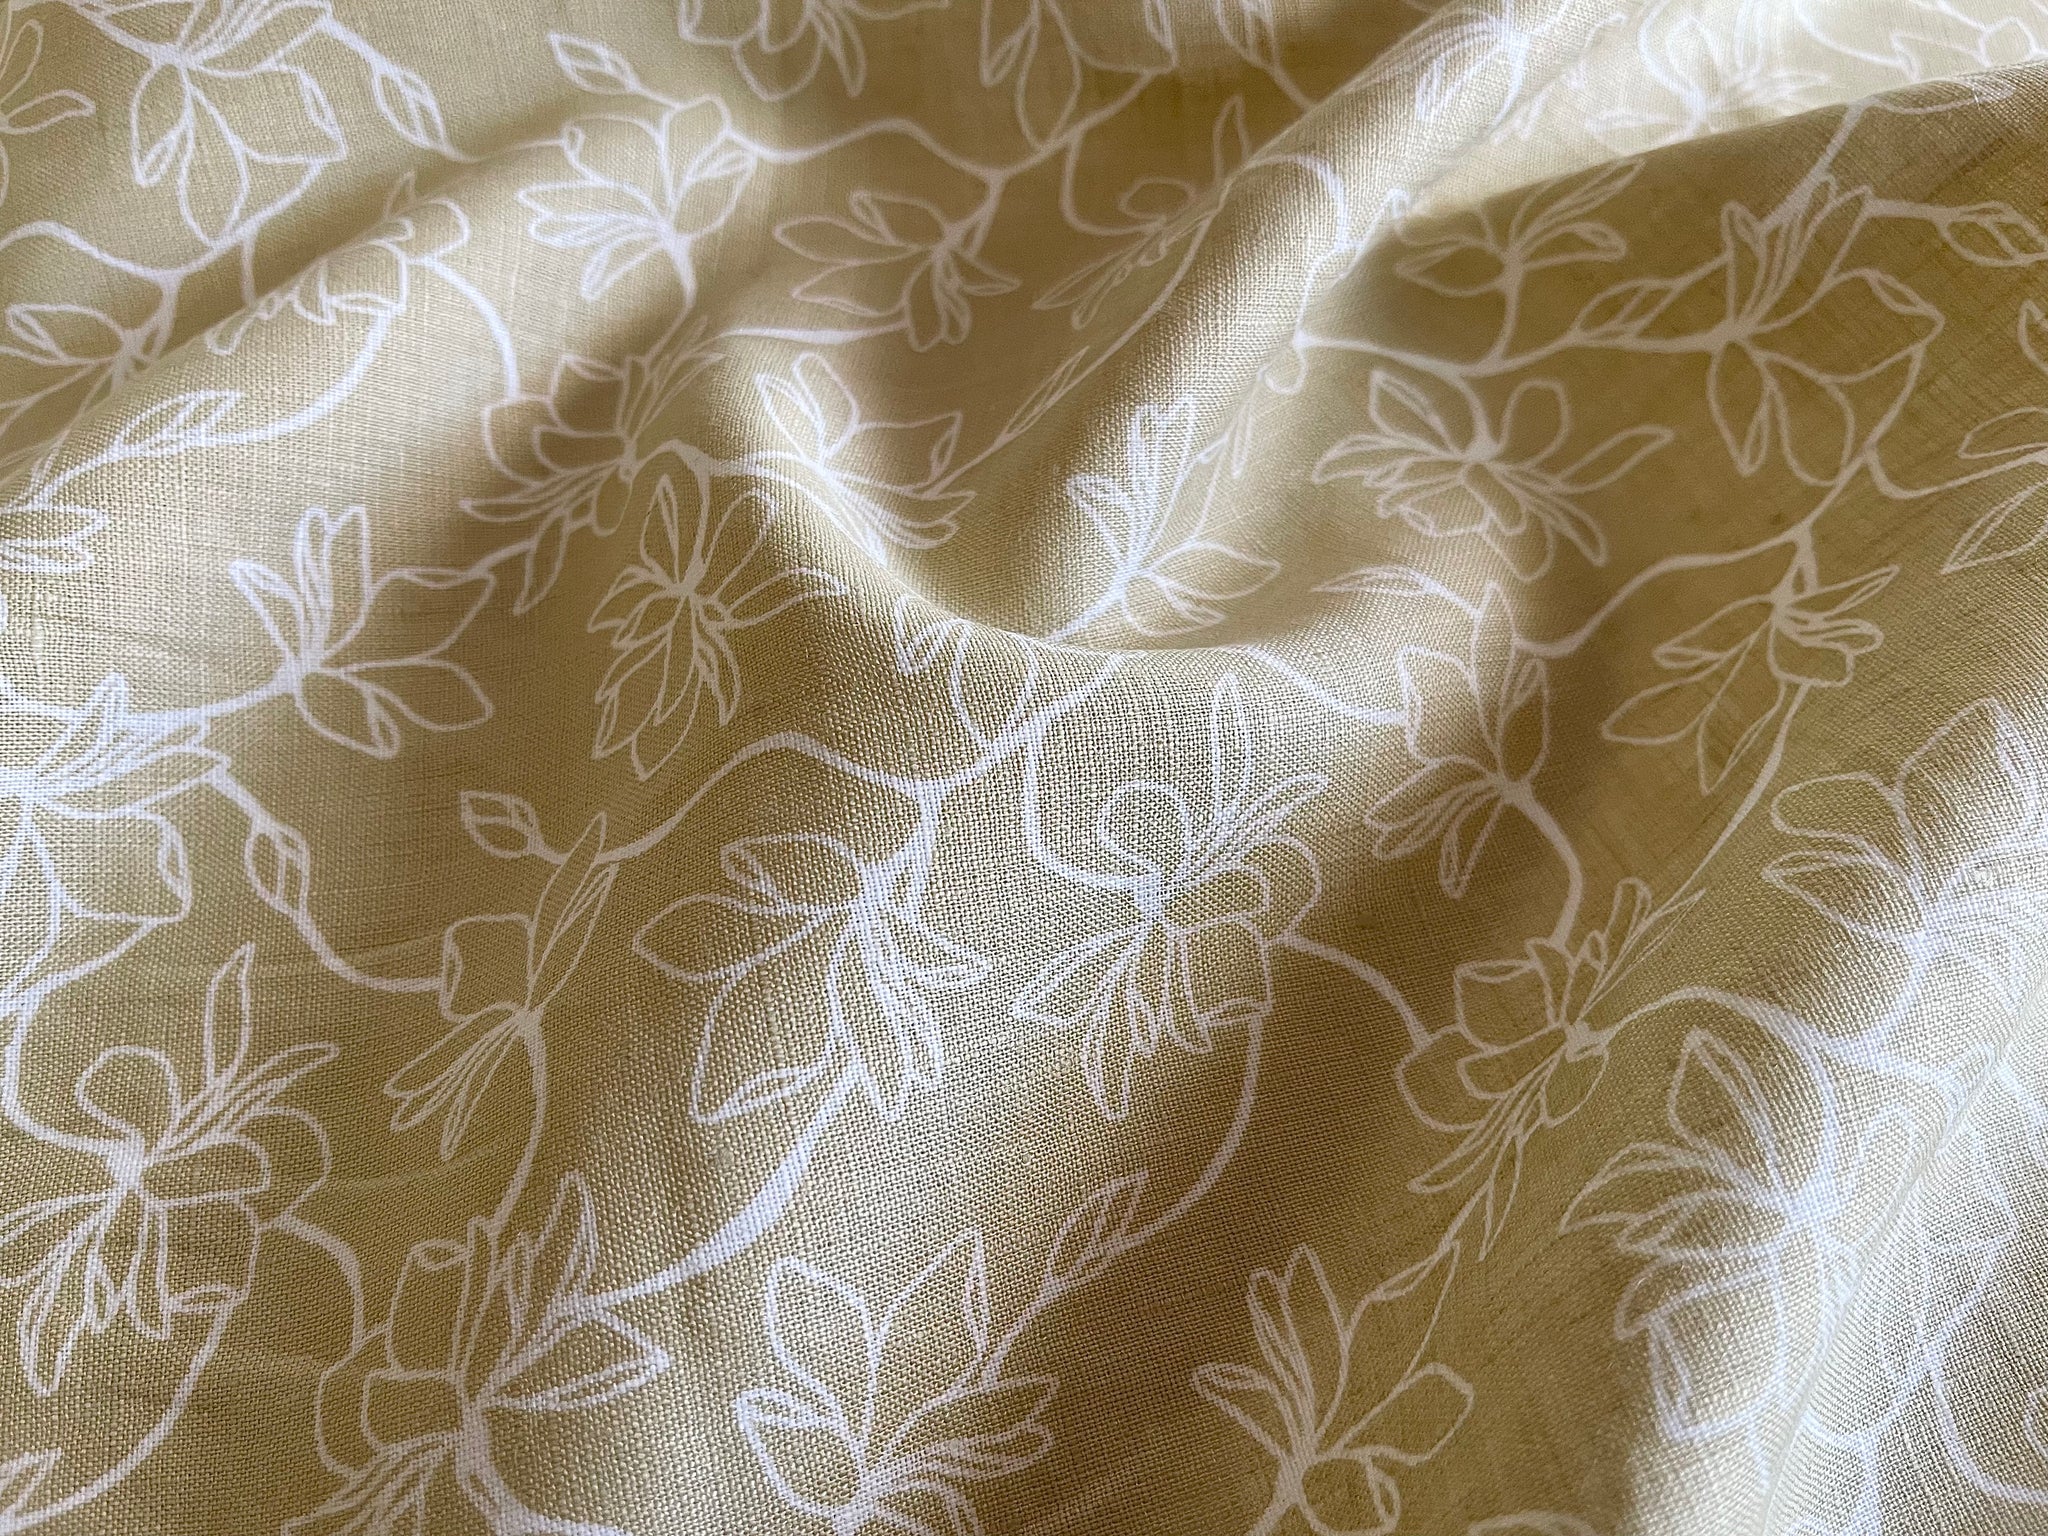 Deadstock Linen Fabric - Lotus Print in Hay Yellow and White